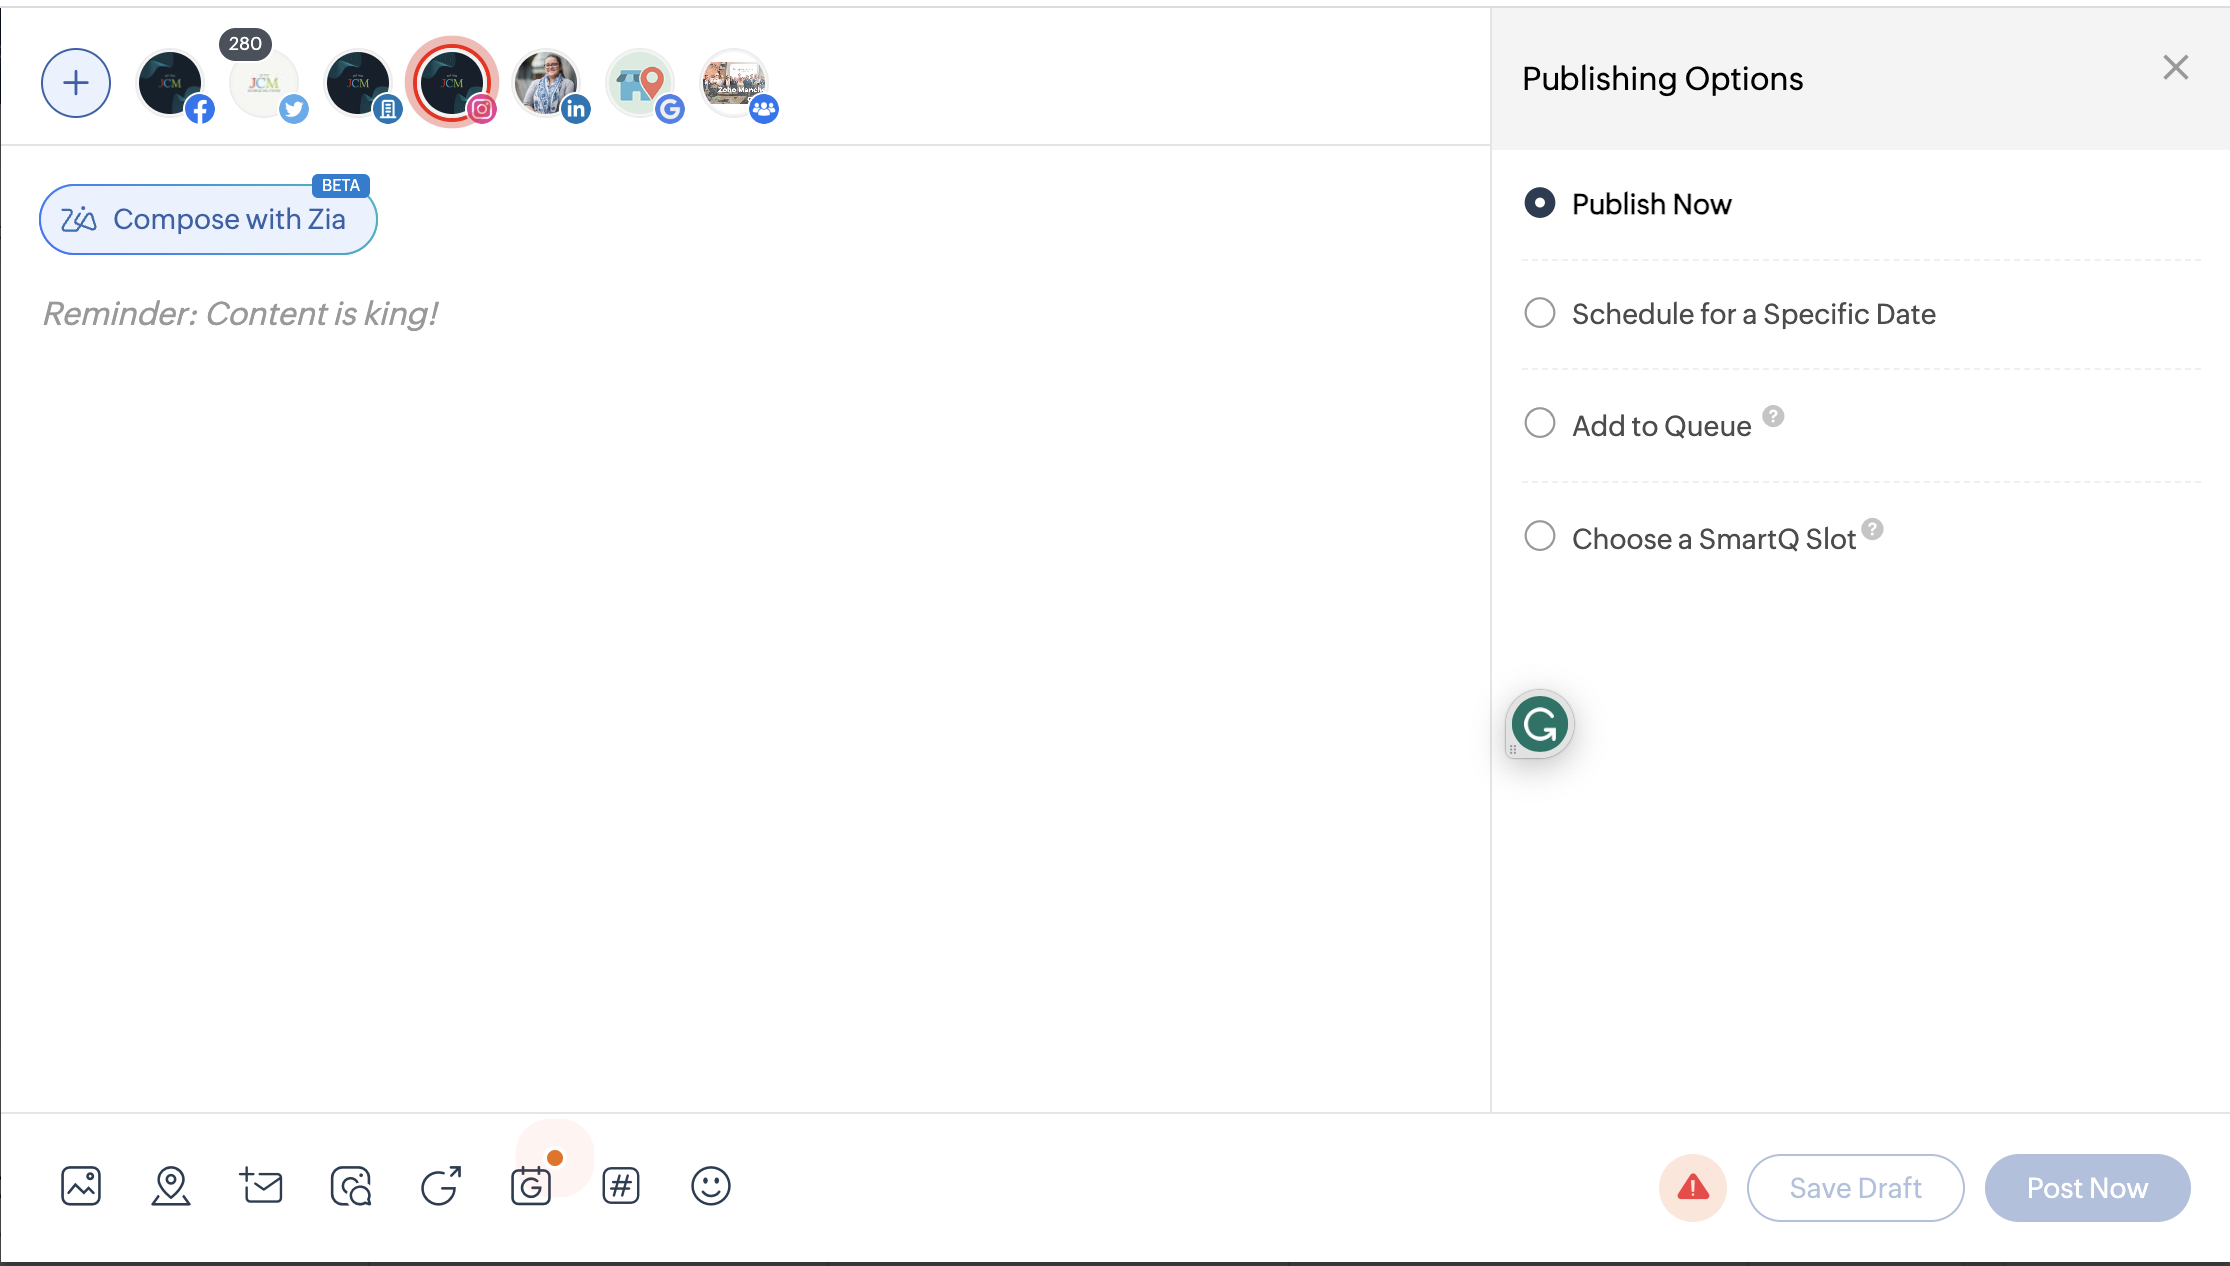 New Post editing screen in zoho social